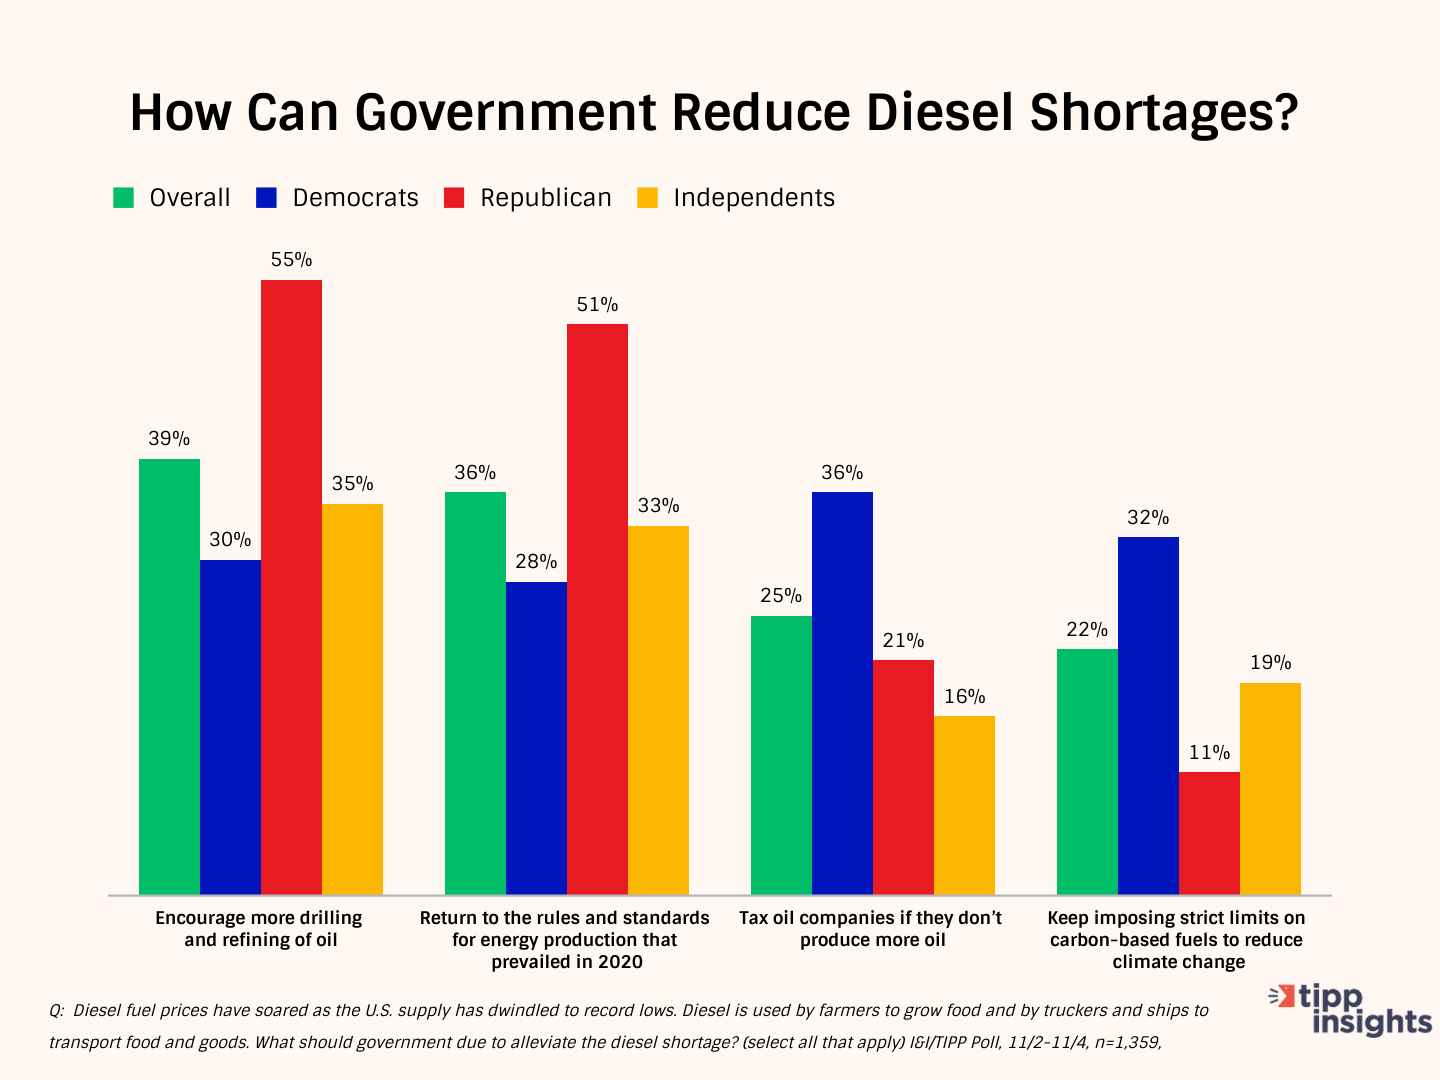 How can government reduce diesel shortages? (By party)